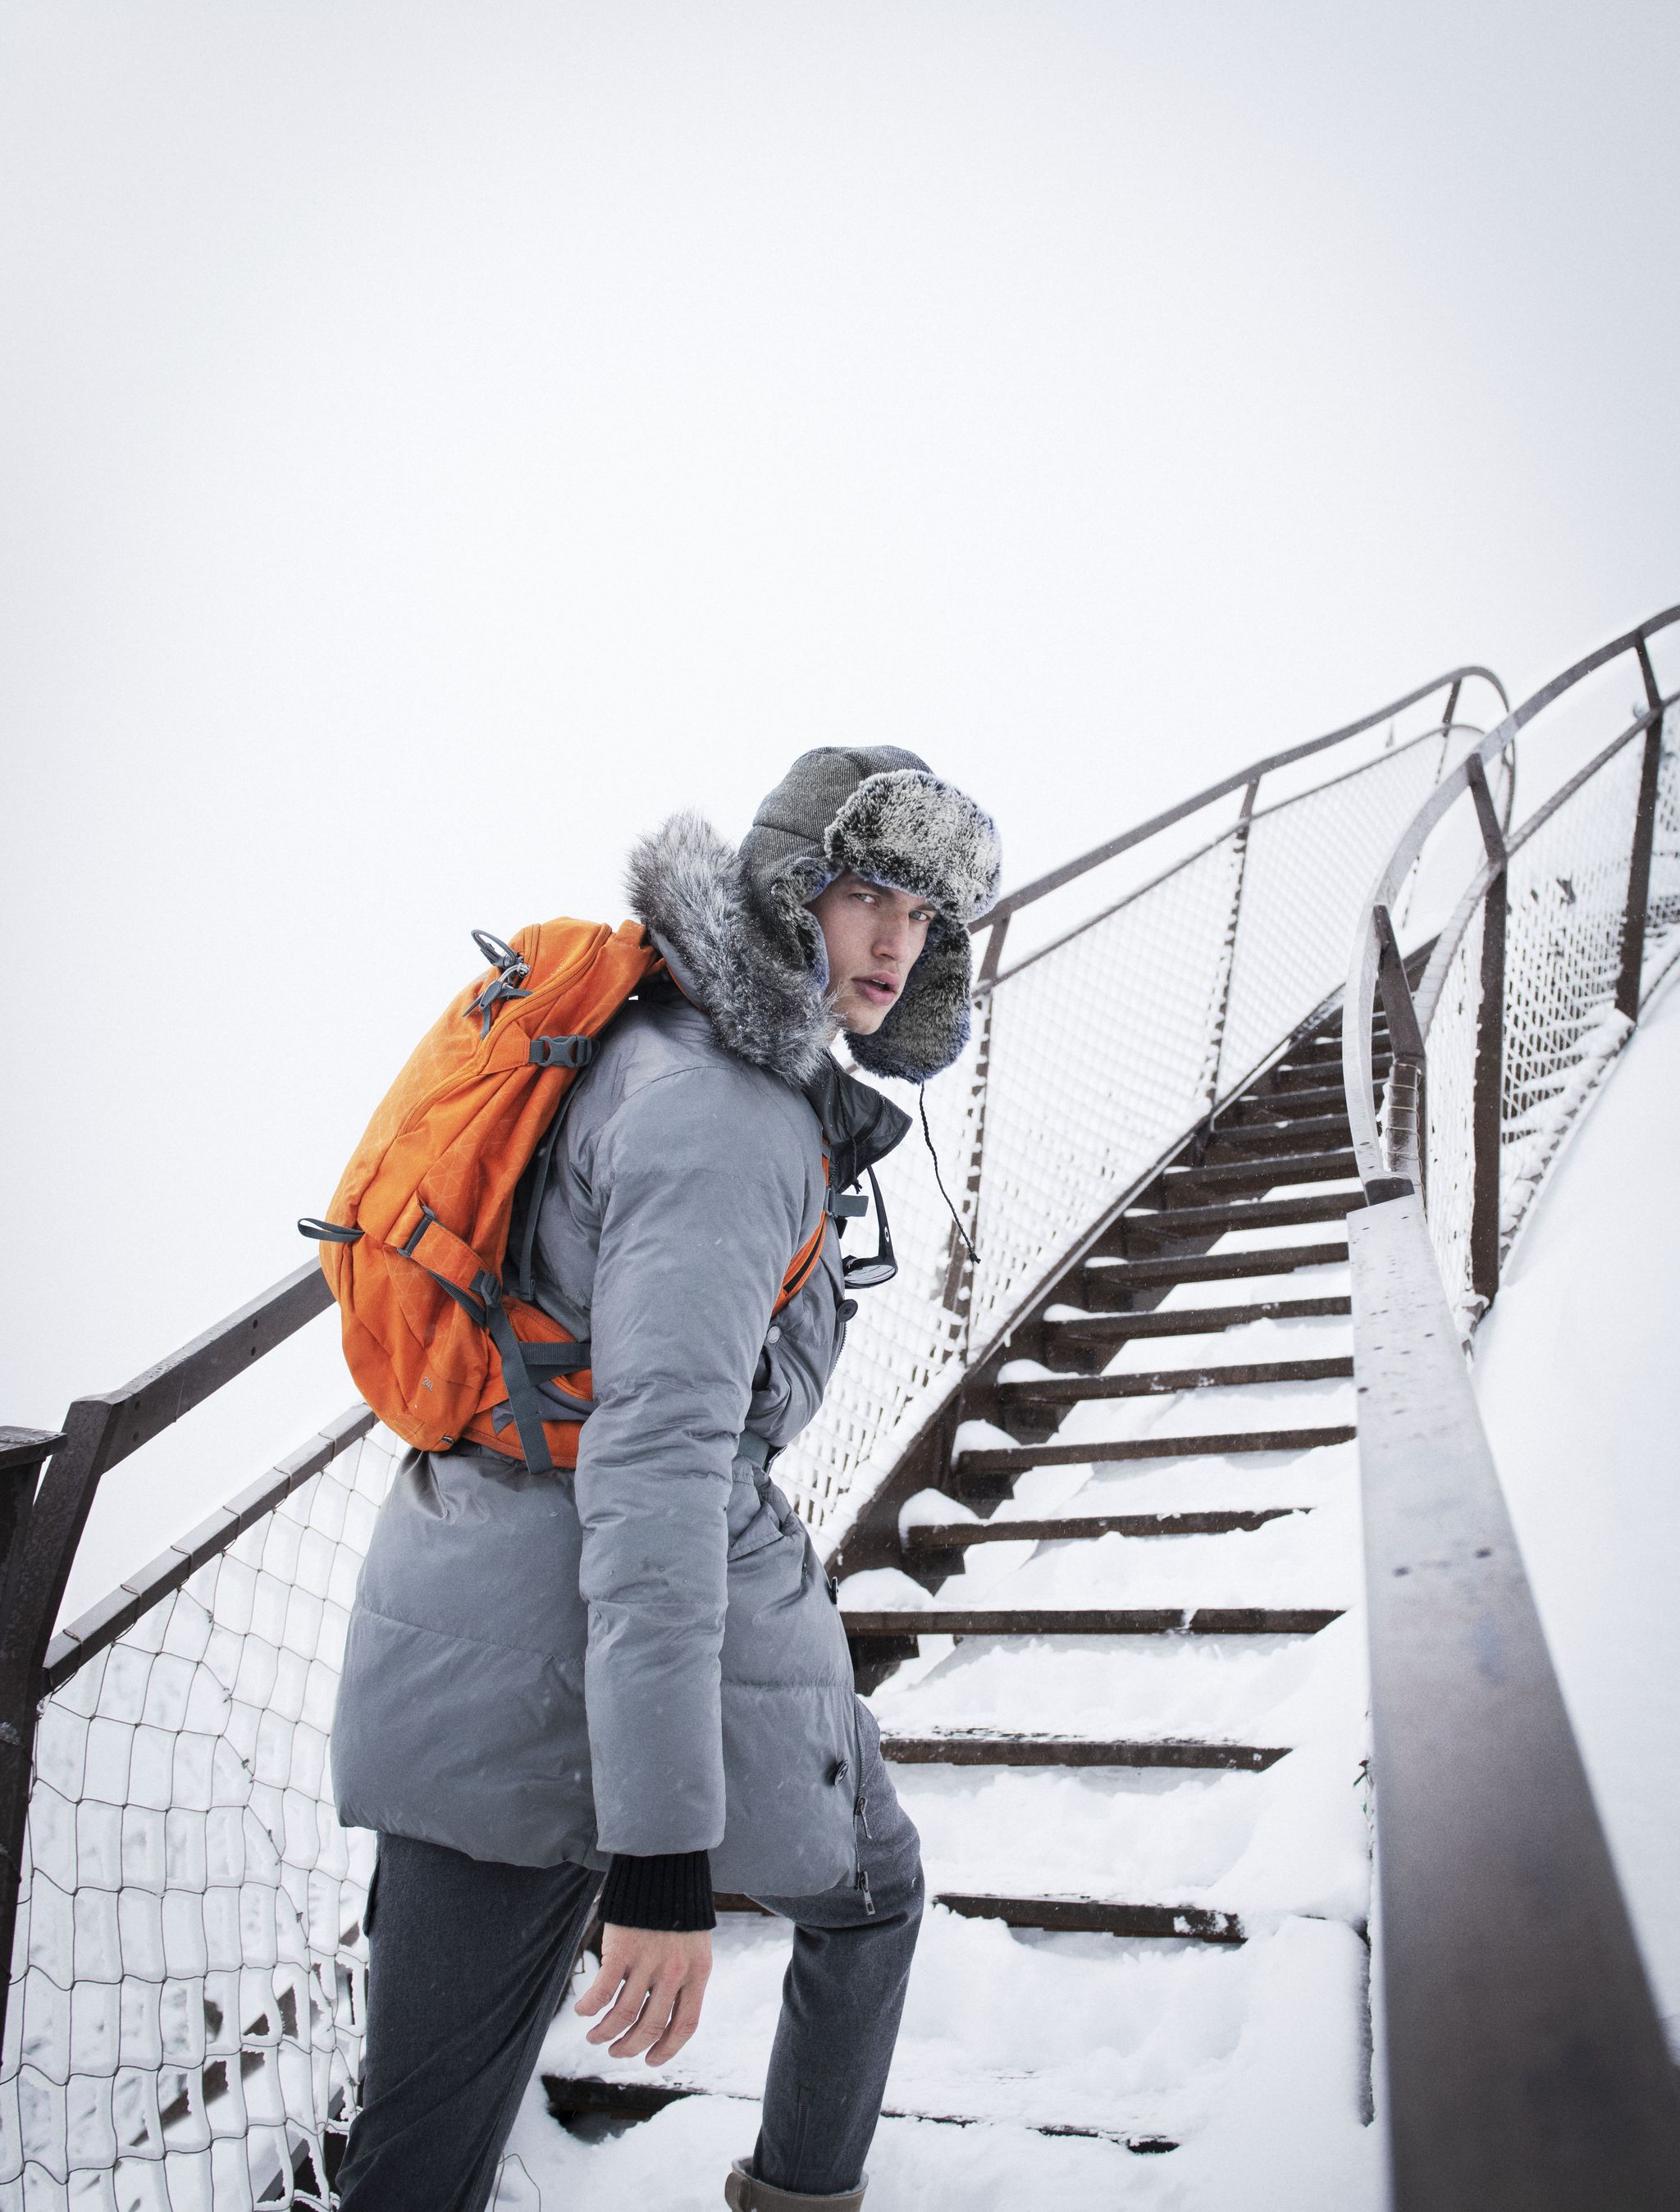 White, Snow, Outerwear, Stairs, Cool, Jacket, Winter, Footwear, Handrail, Photography, 